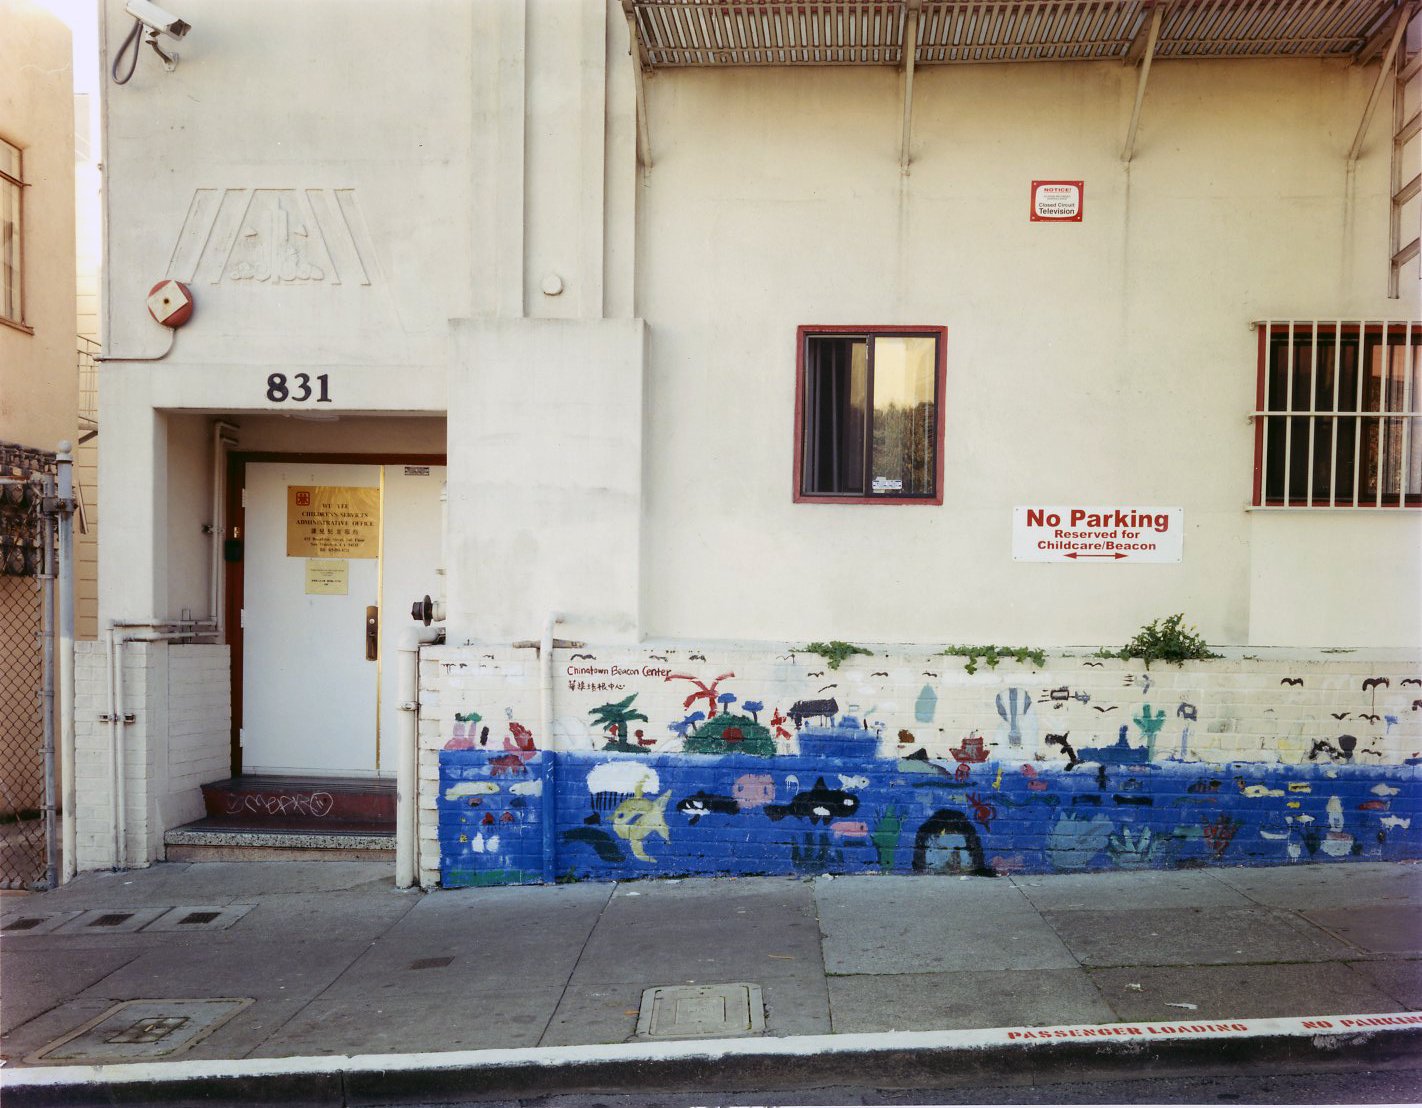  Wu Lee Children’s Services (formerly The Beige Room), San Francisco, California, 2007 